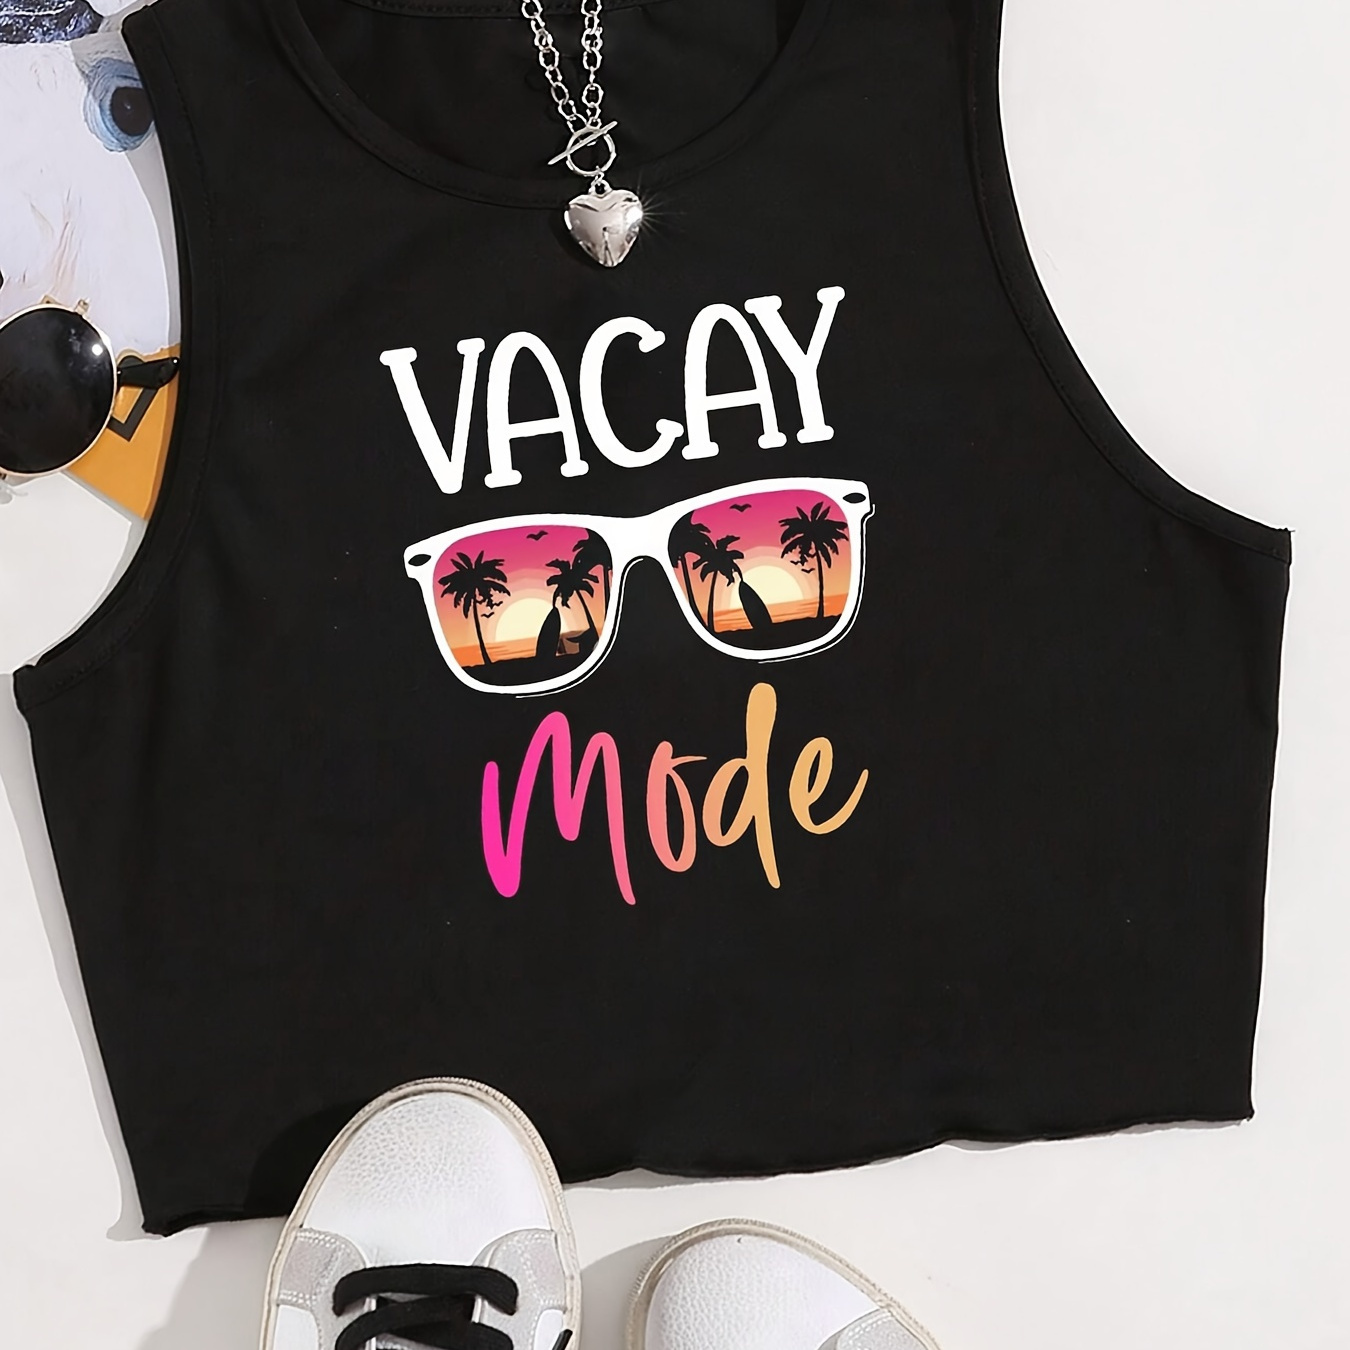 

Women's "vacay Mode" Printed Sleeveless Crop Top, Casual Sporty Tank For Fitness & Workout, Round Neck, Graphic Tee With Sunglasses & Palm Trees Design